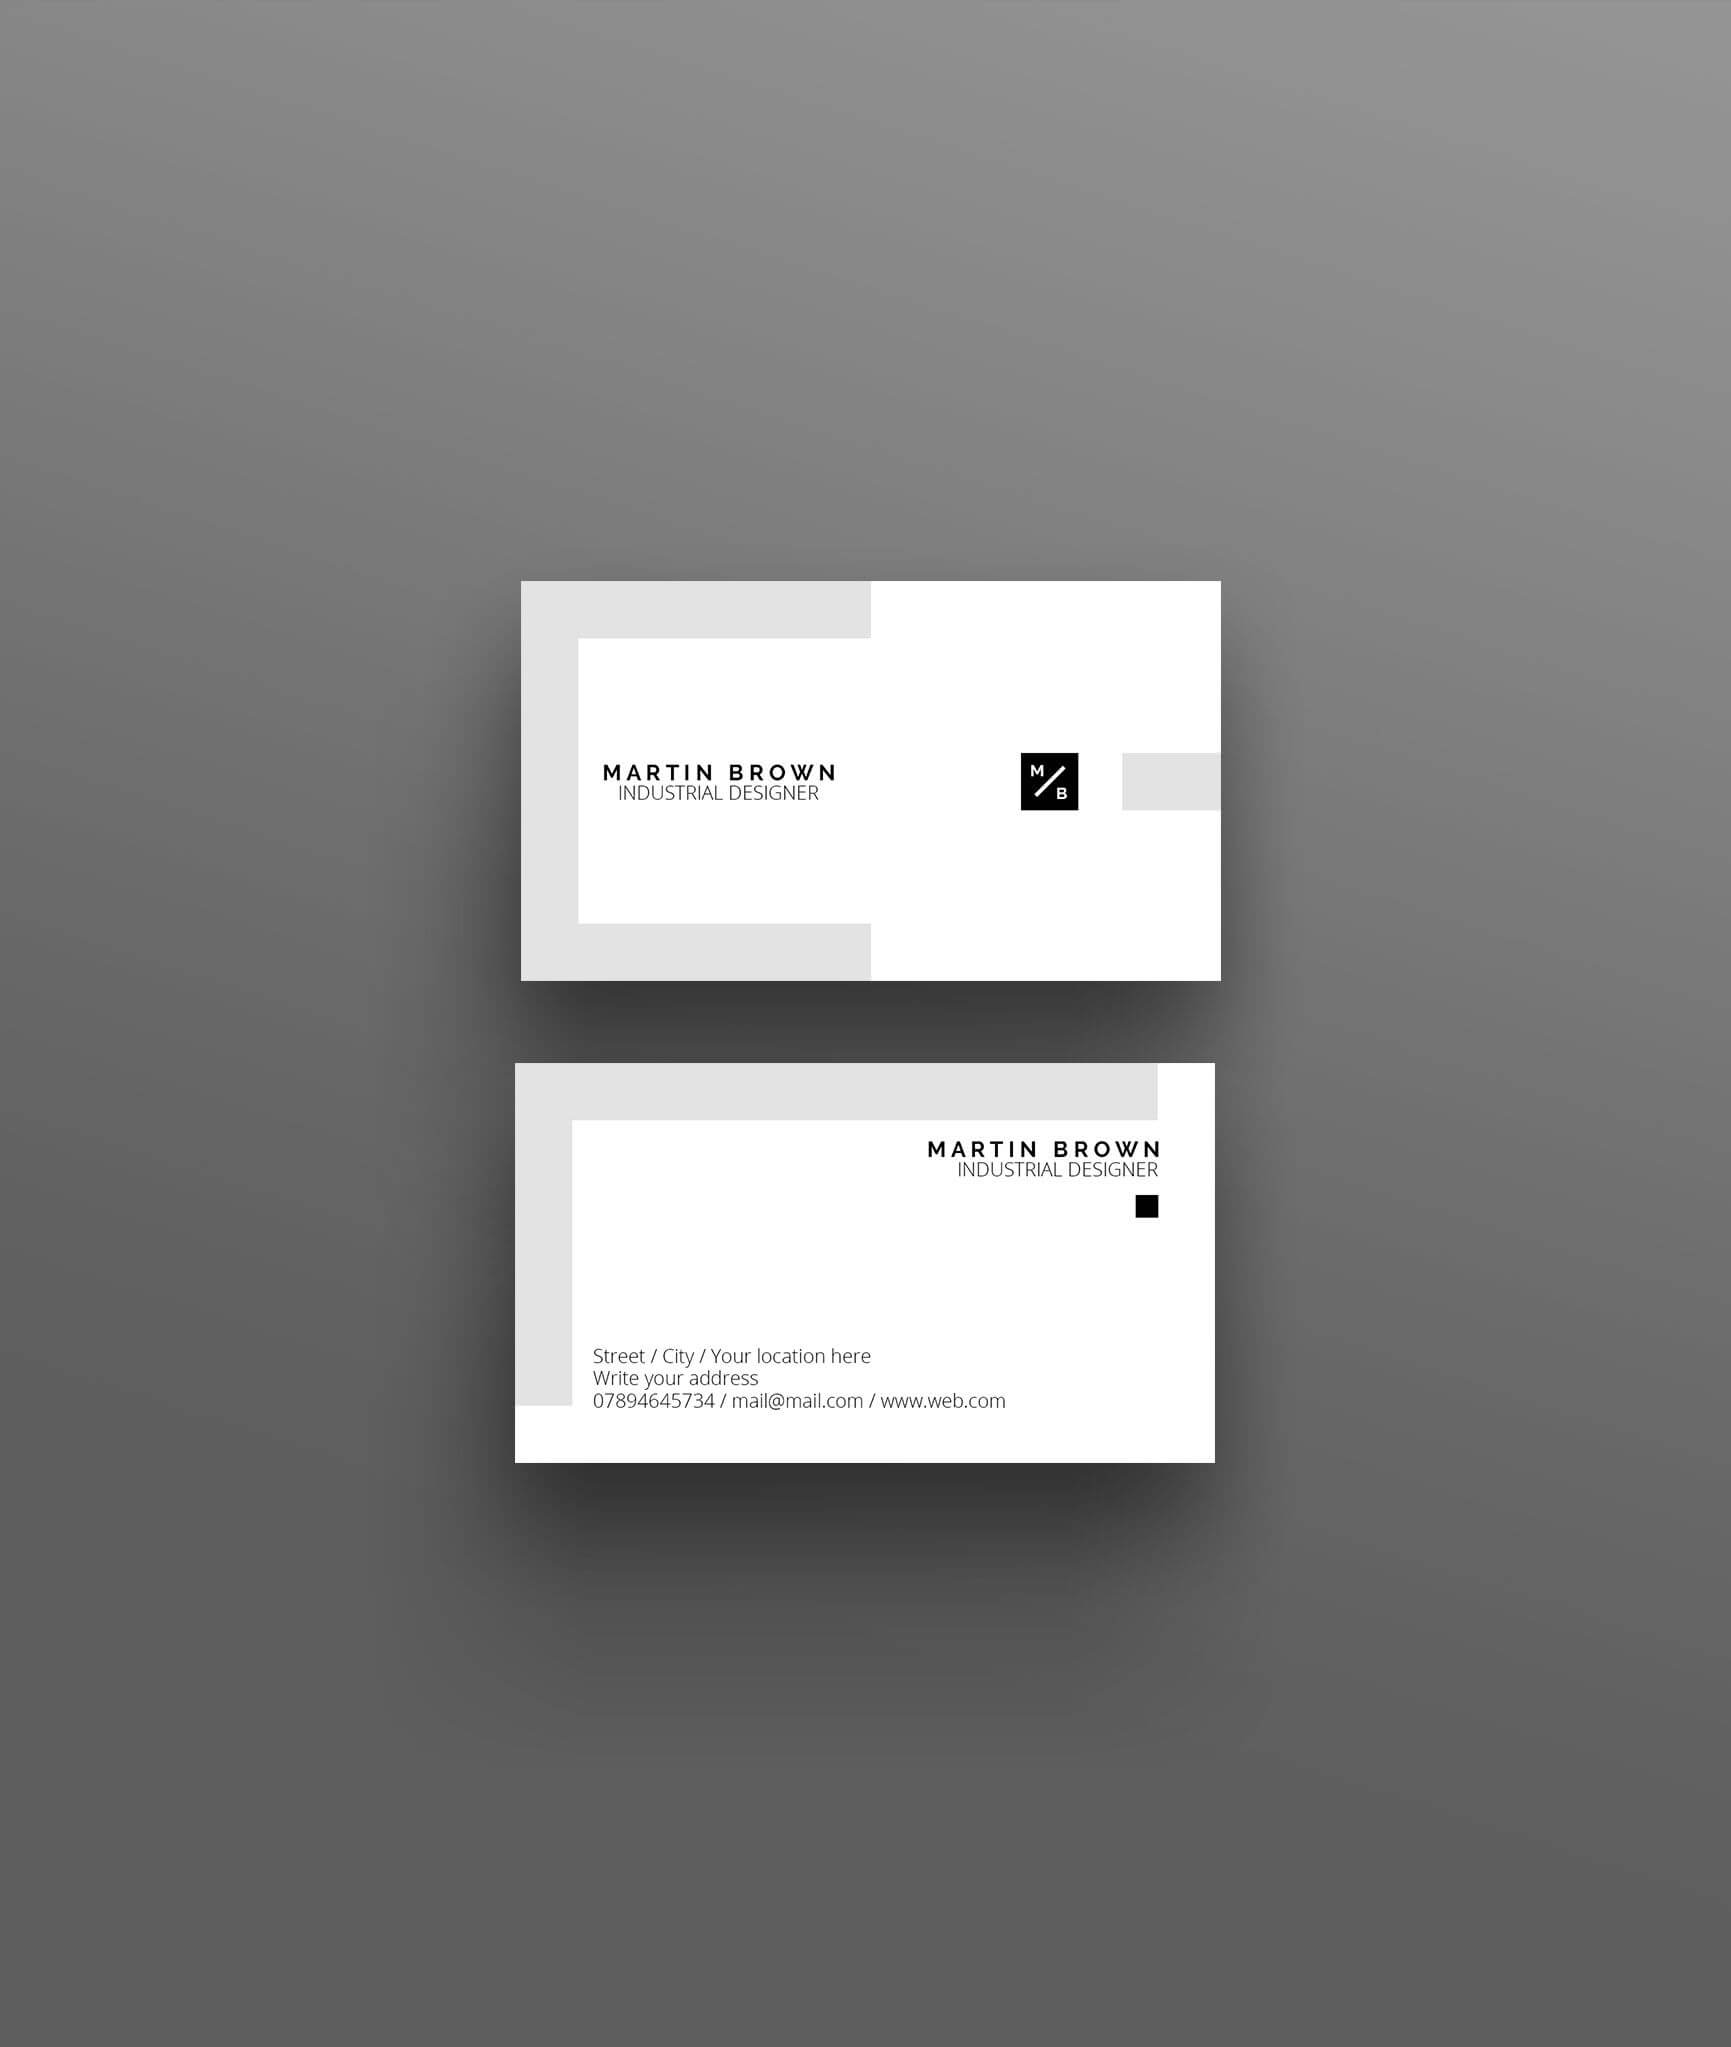 Business Card Template For Adobe Photoshop / Psd File Intended For Name Card Photoshop Template